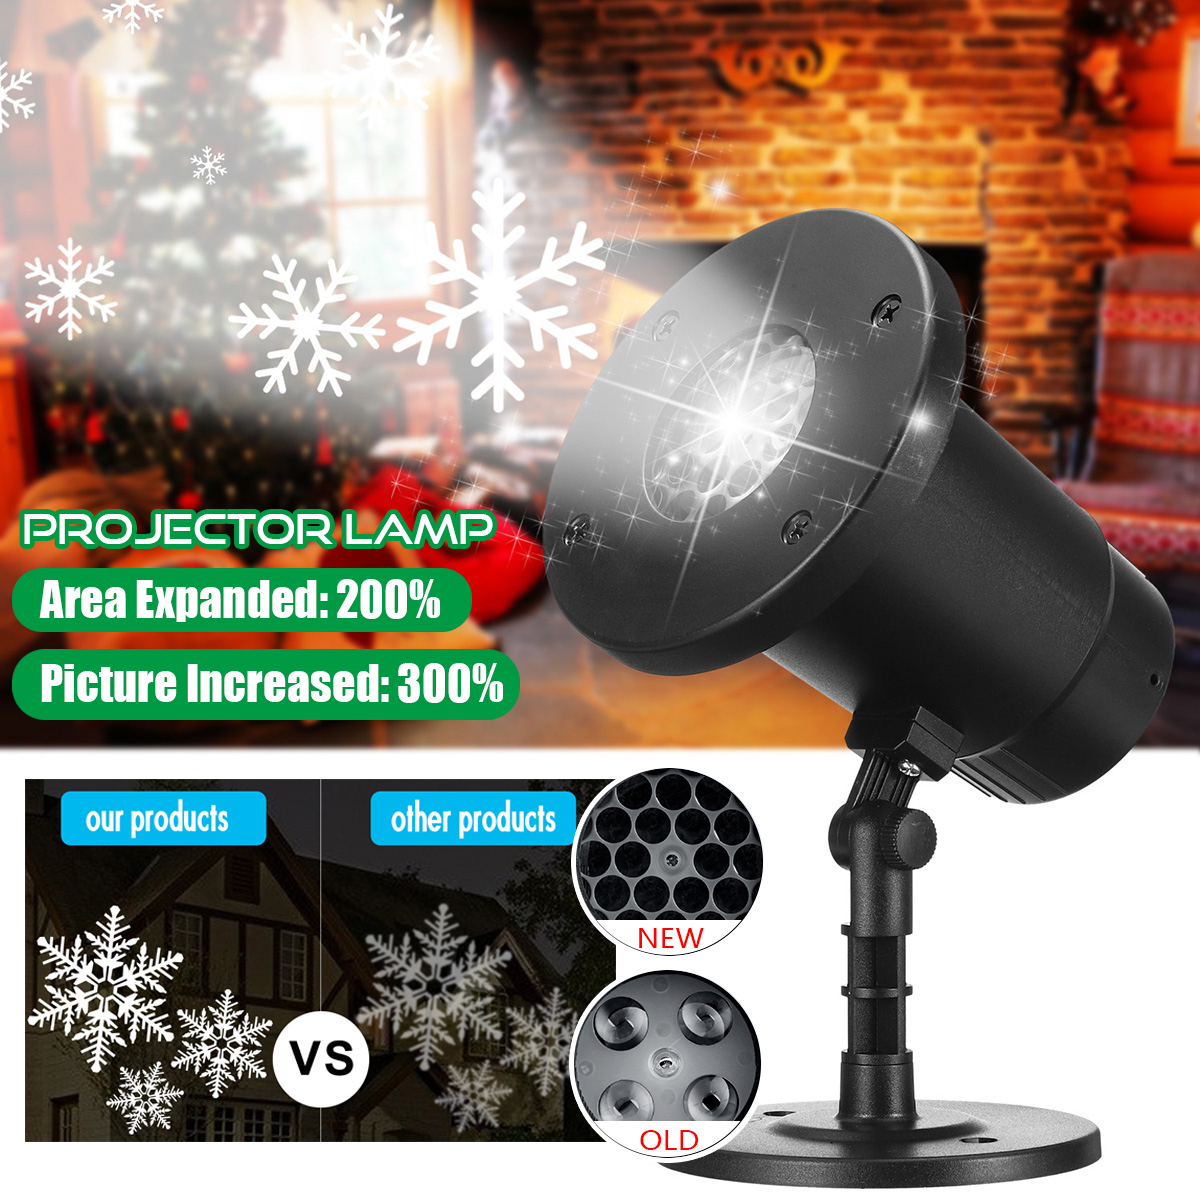 Portable-IP65-Waterproof-WhiteColorful-Snowflakes-Projector-Lamp-Outdoor-Work-Light-Landscape-Light--1605854-1